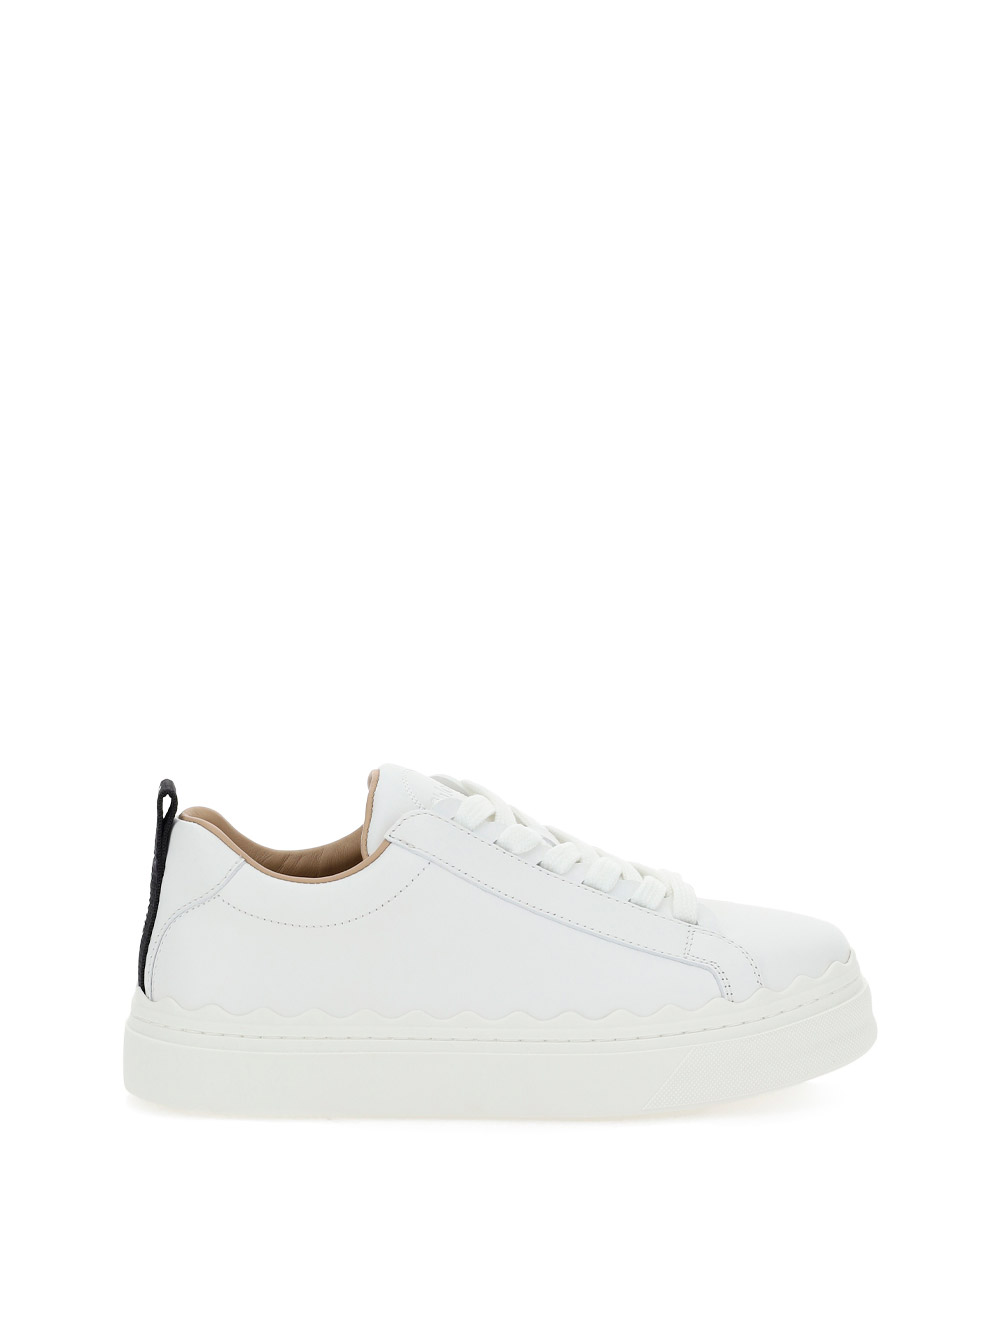 Chloé Trainers In White